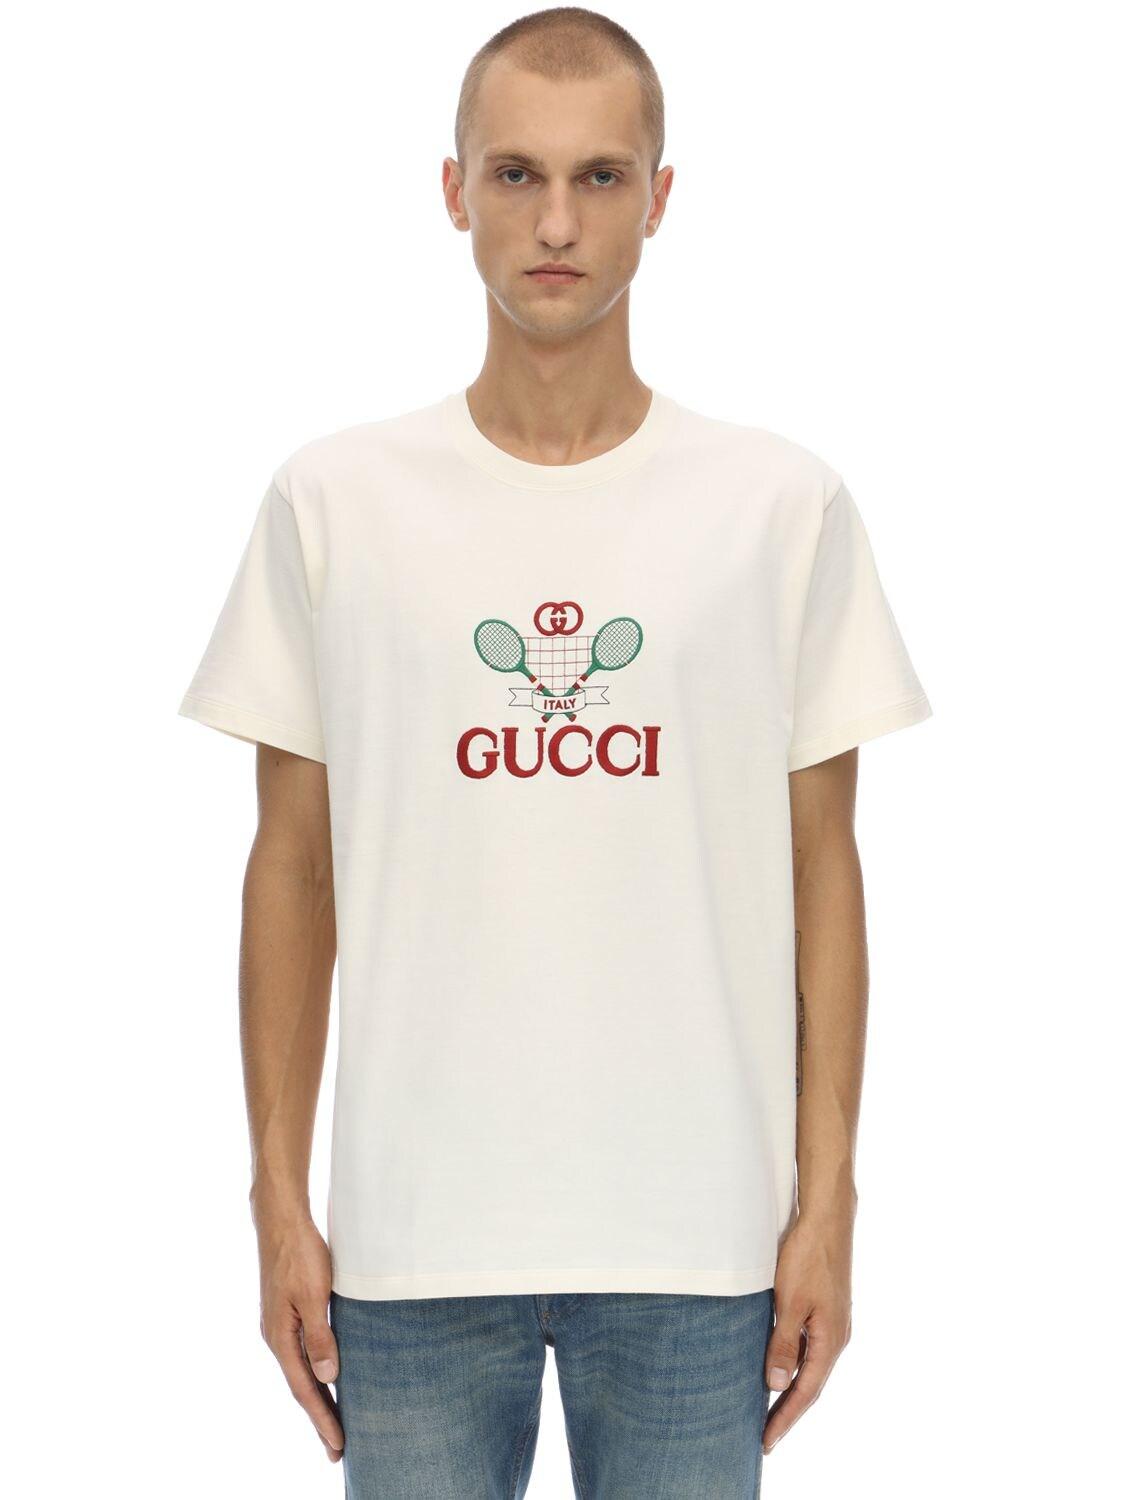 Gucci Gg Tennis Embroidered Cotton T-shirt in White for Men - Save 31% ...